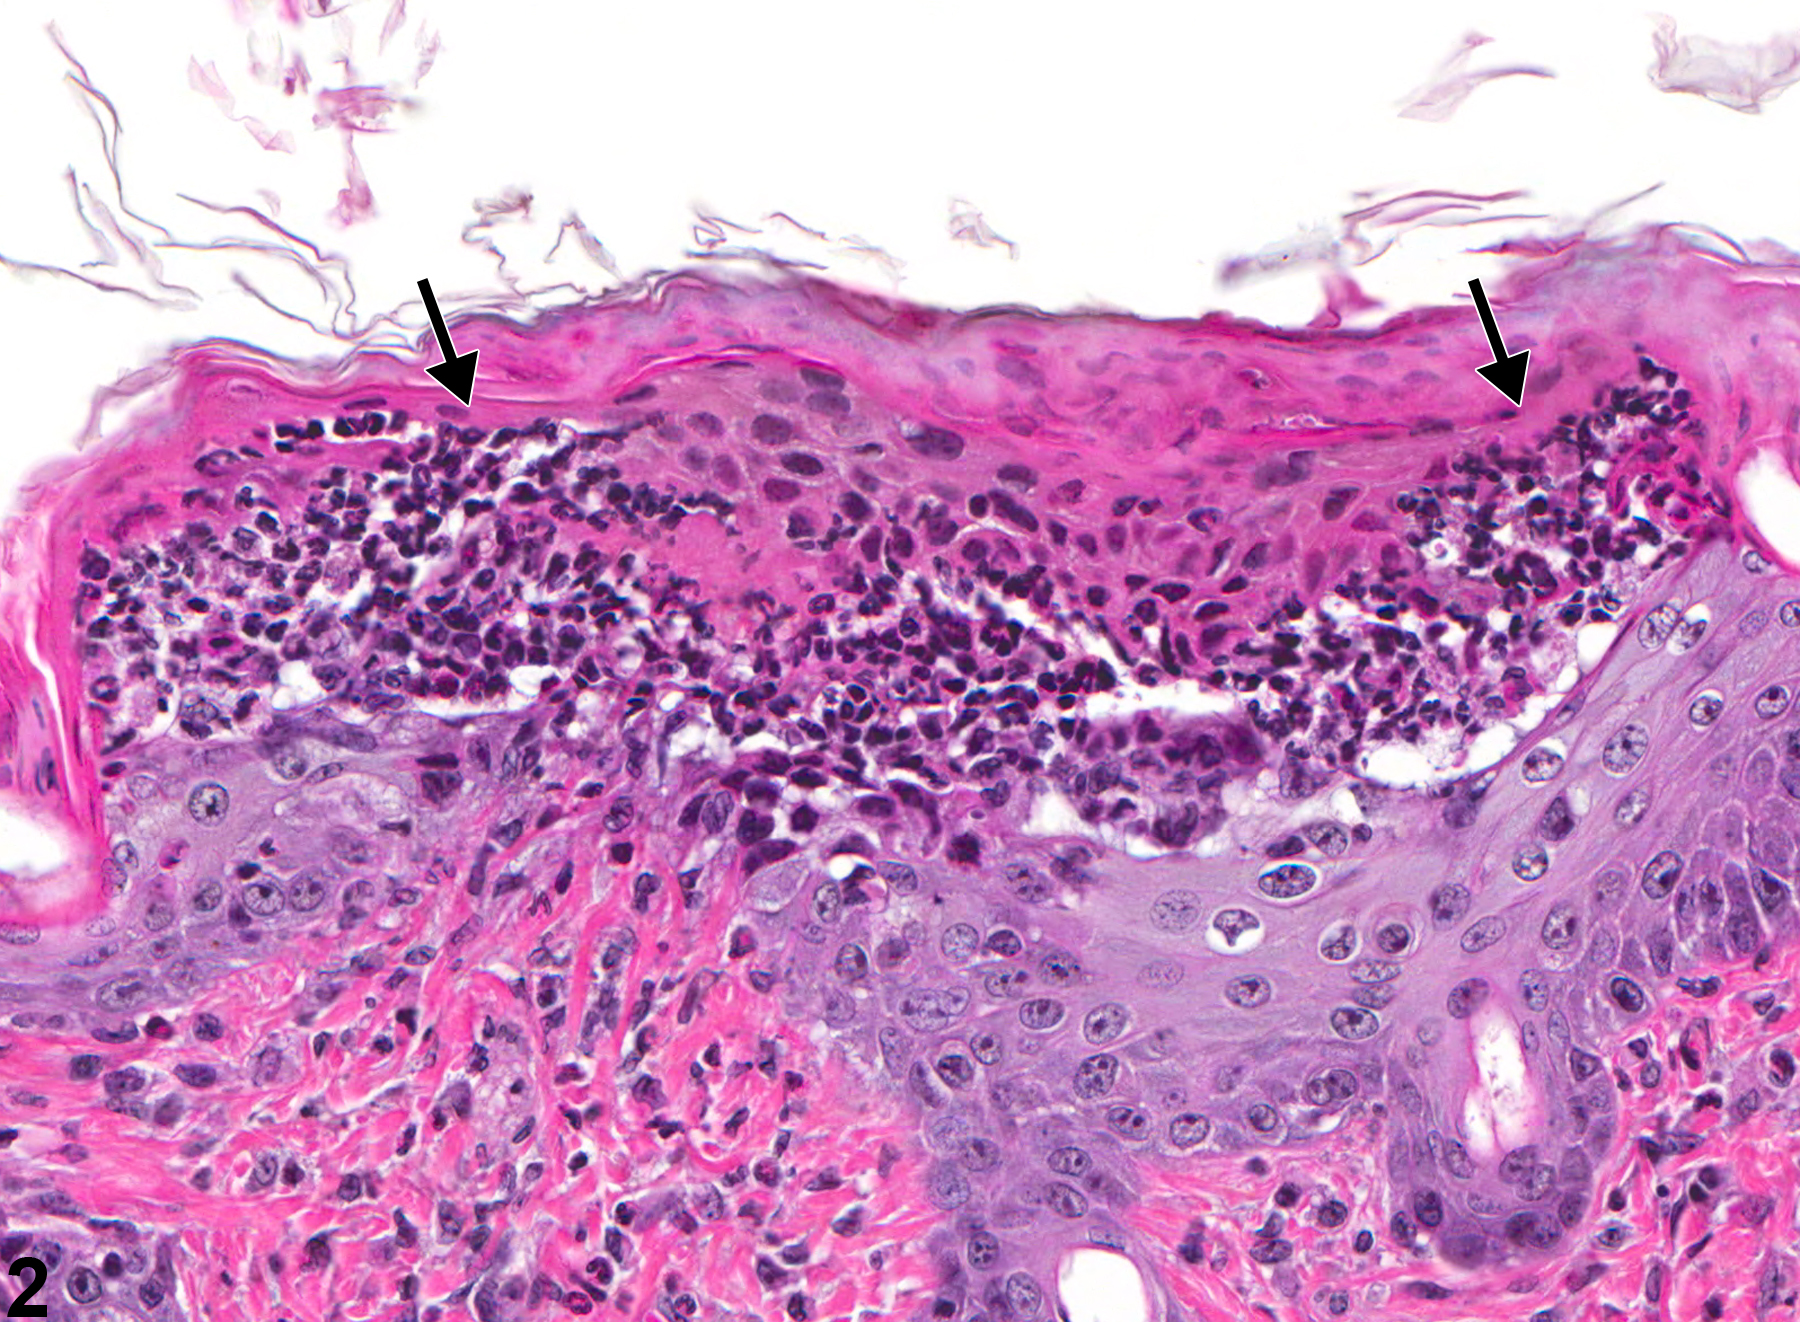 Image of pustule in the skin from a male B6C3F1 mouse in a subchronic study